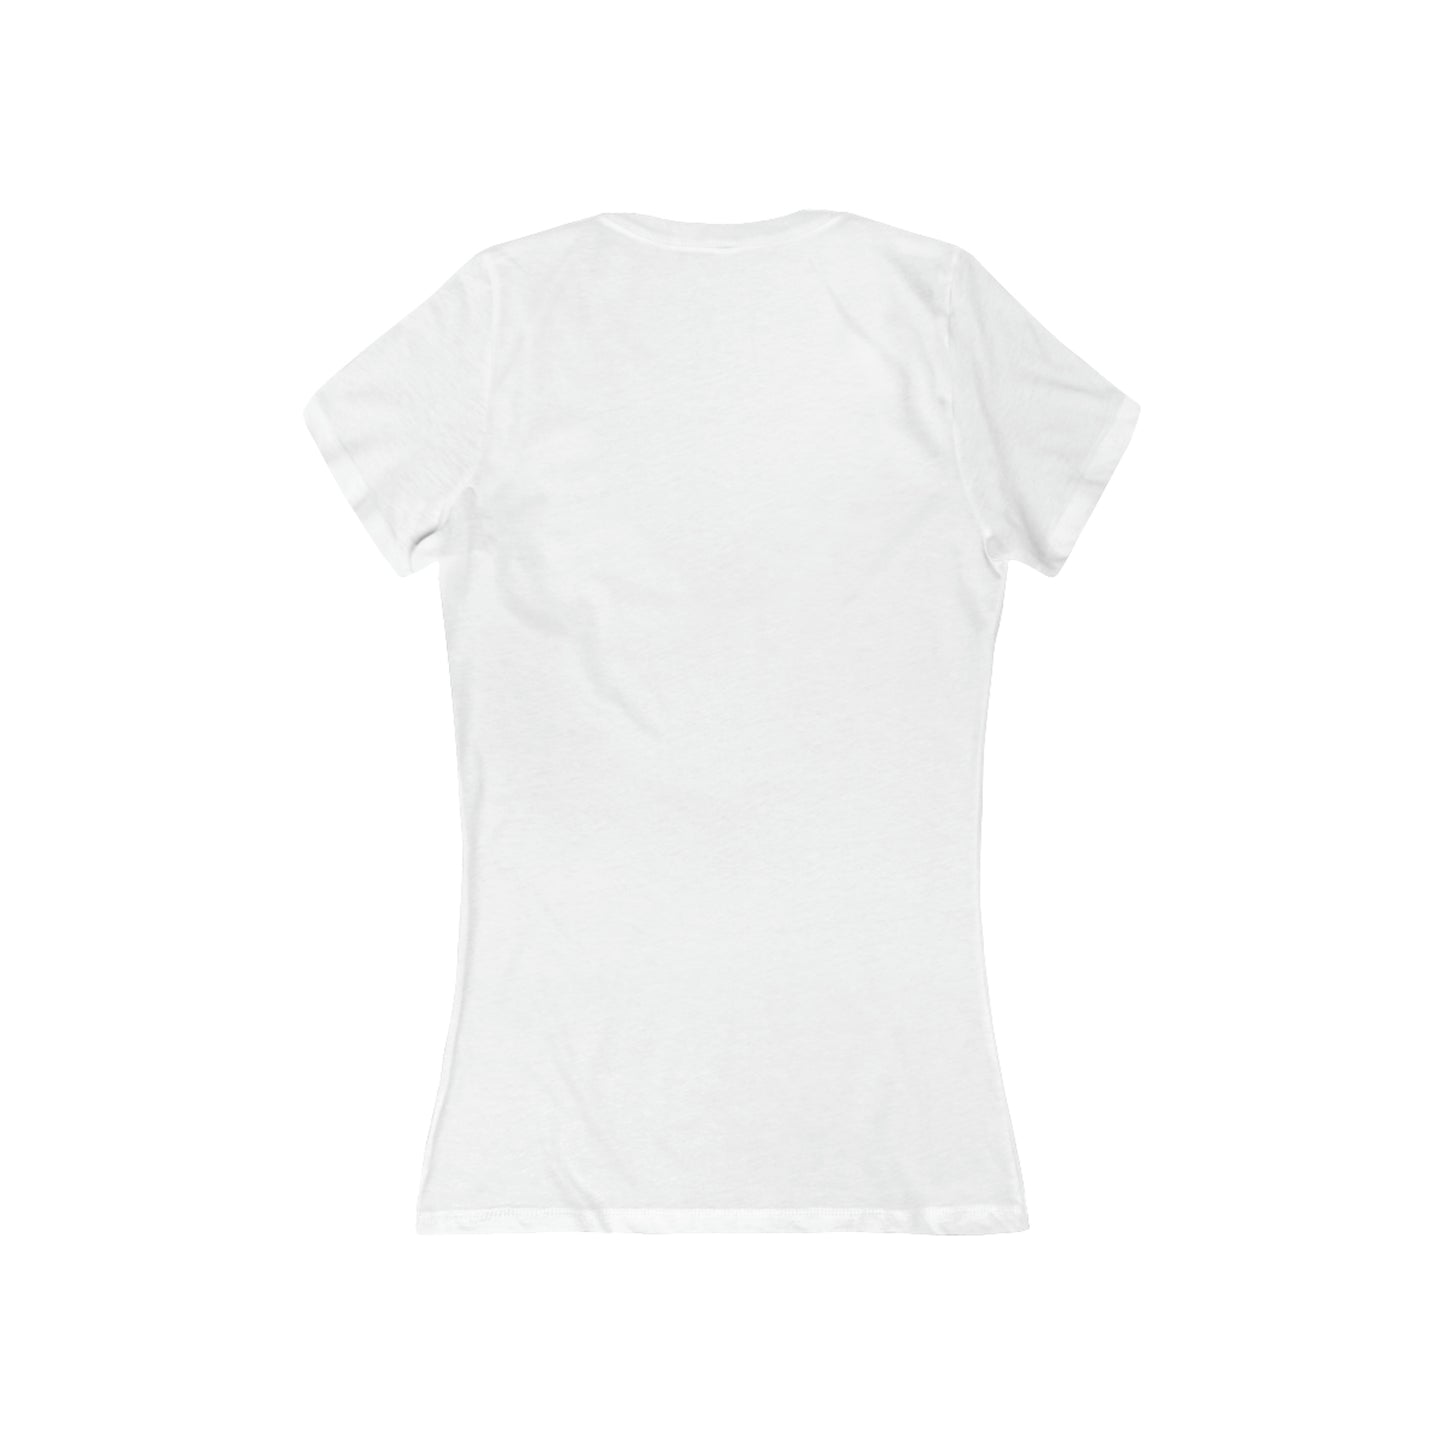 SILVER Classic, short sleeve deep v-neck t-shirt, for women embracing silver and gray hair